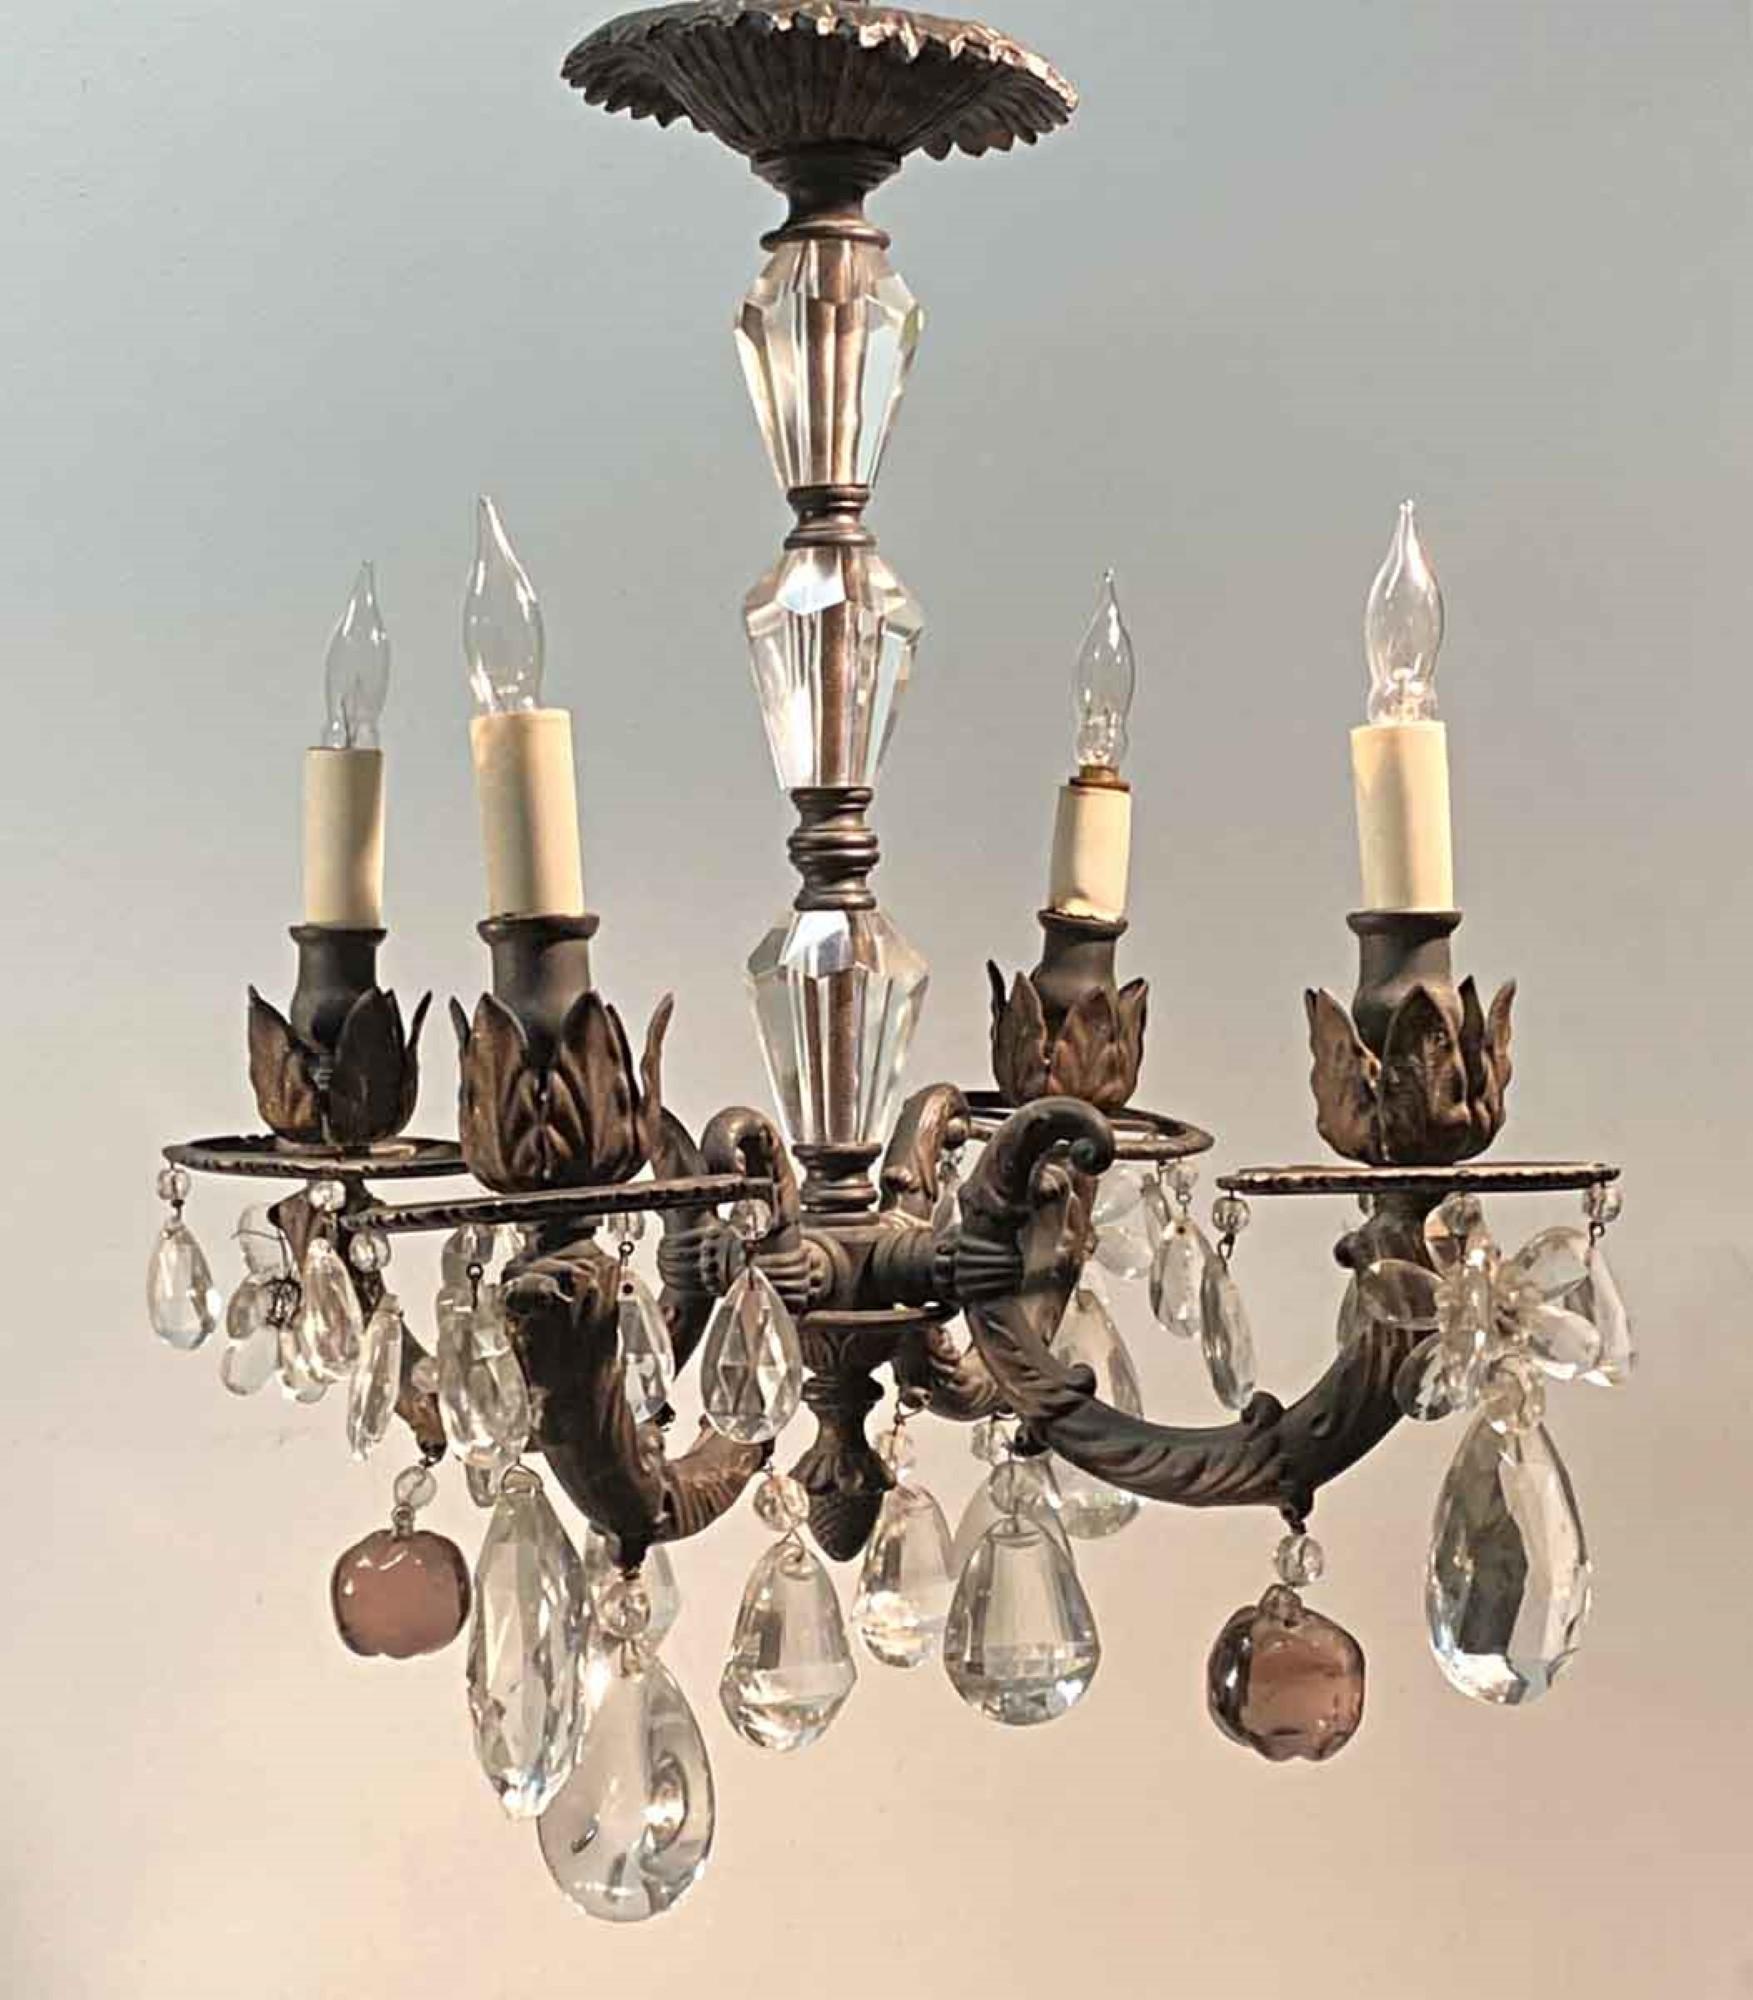 1905 French gas chandelier converted to electric. Four lights. The frame is ornate cast iron fitted out with crystals. This can be seen at our 400 Gilligan St location in Scranton, PA.